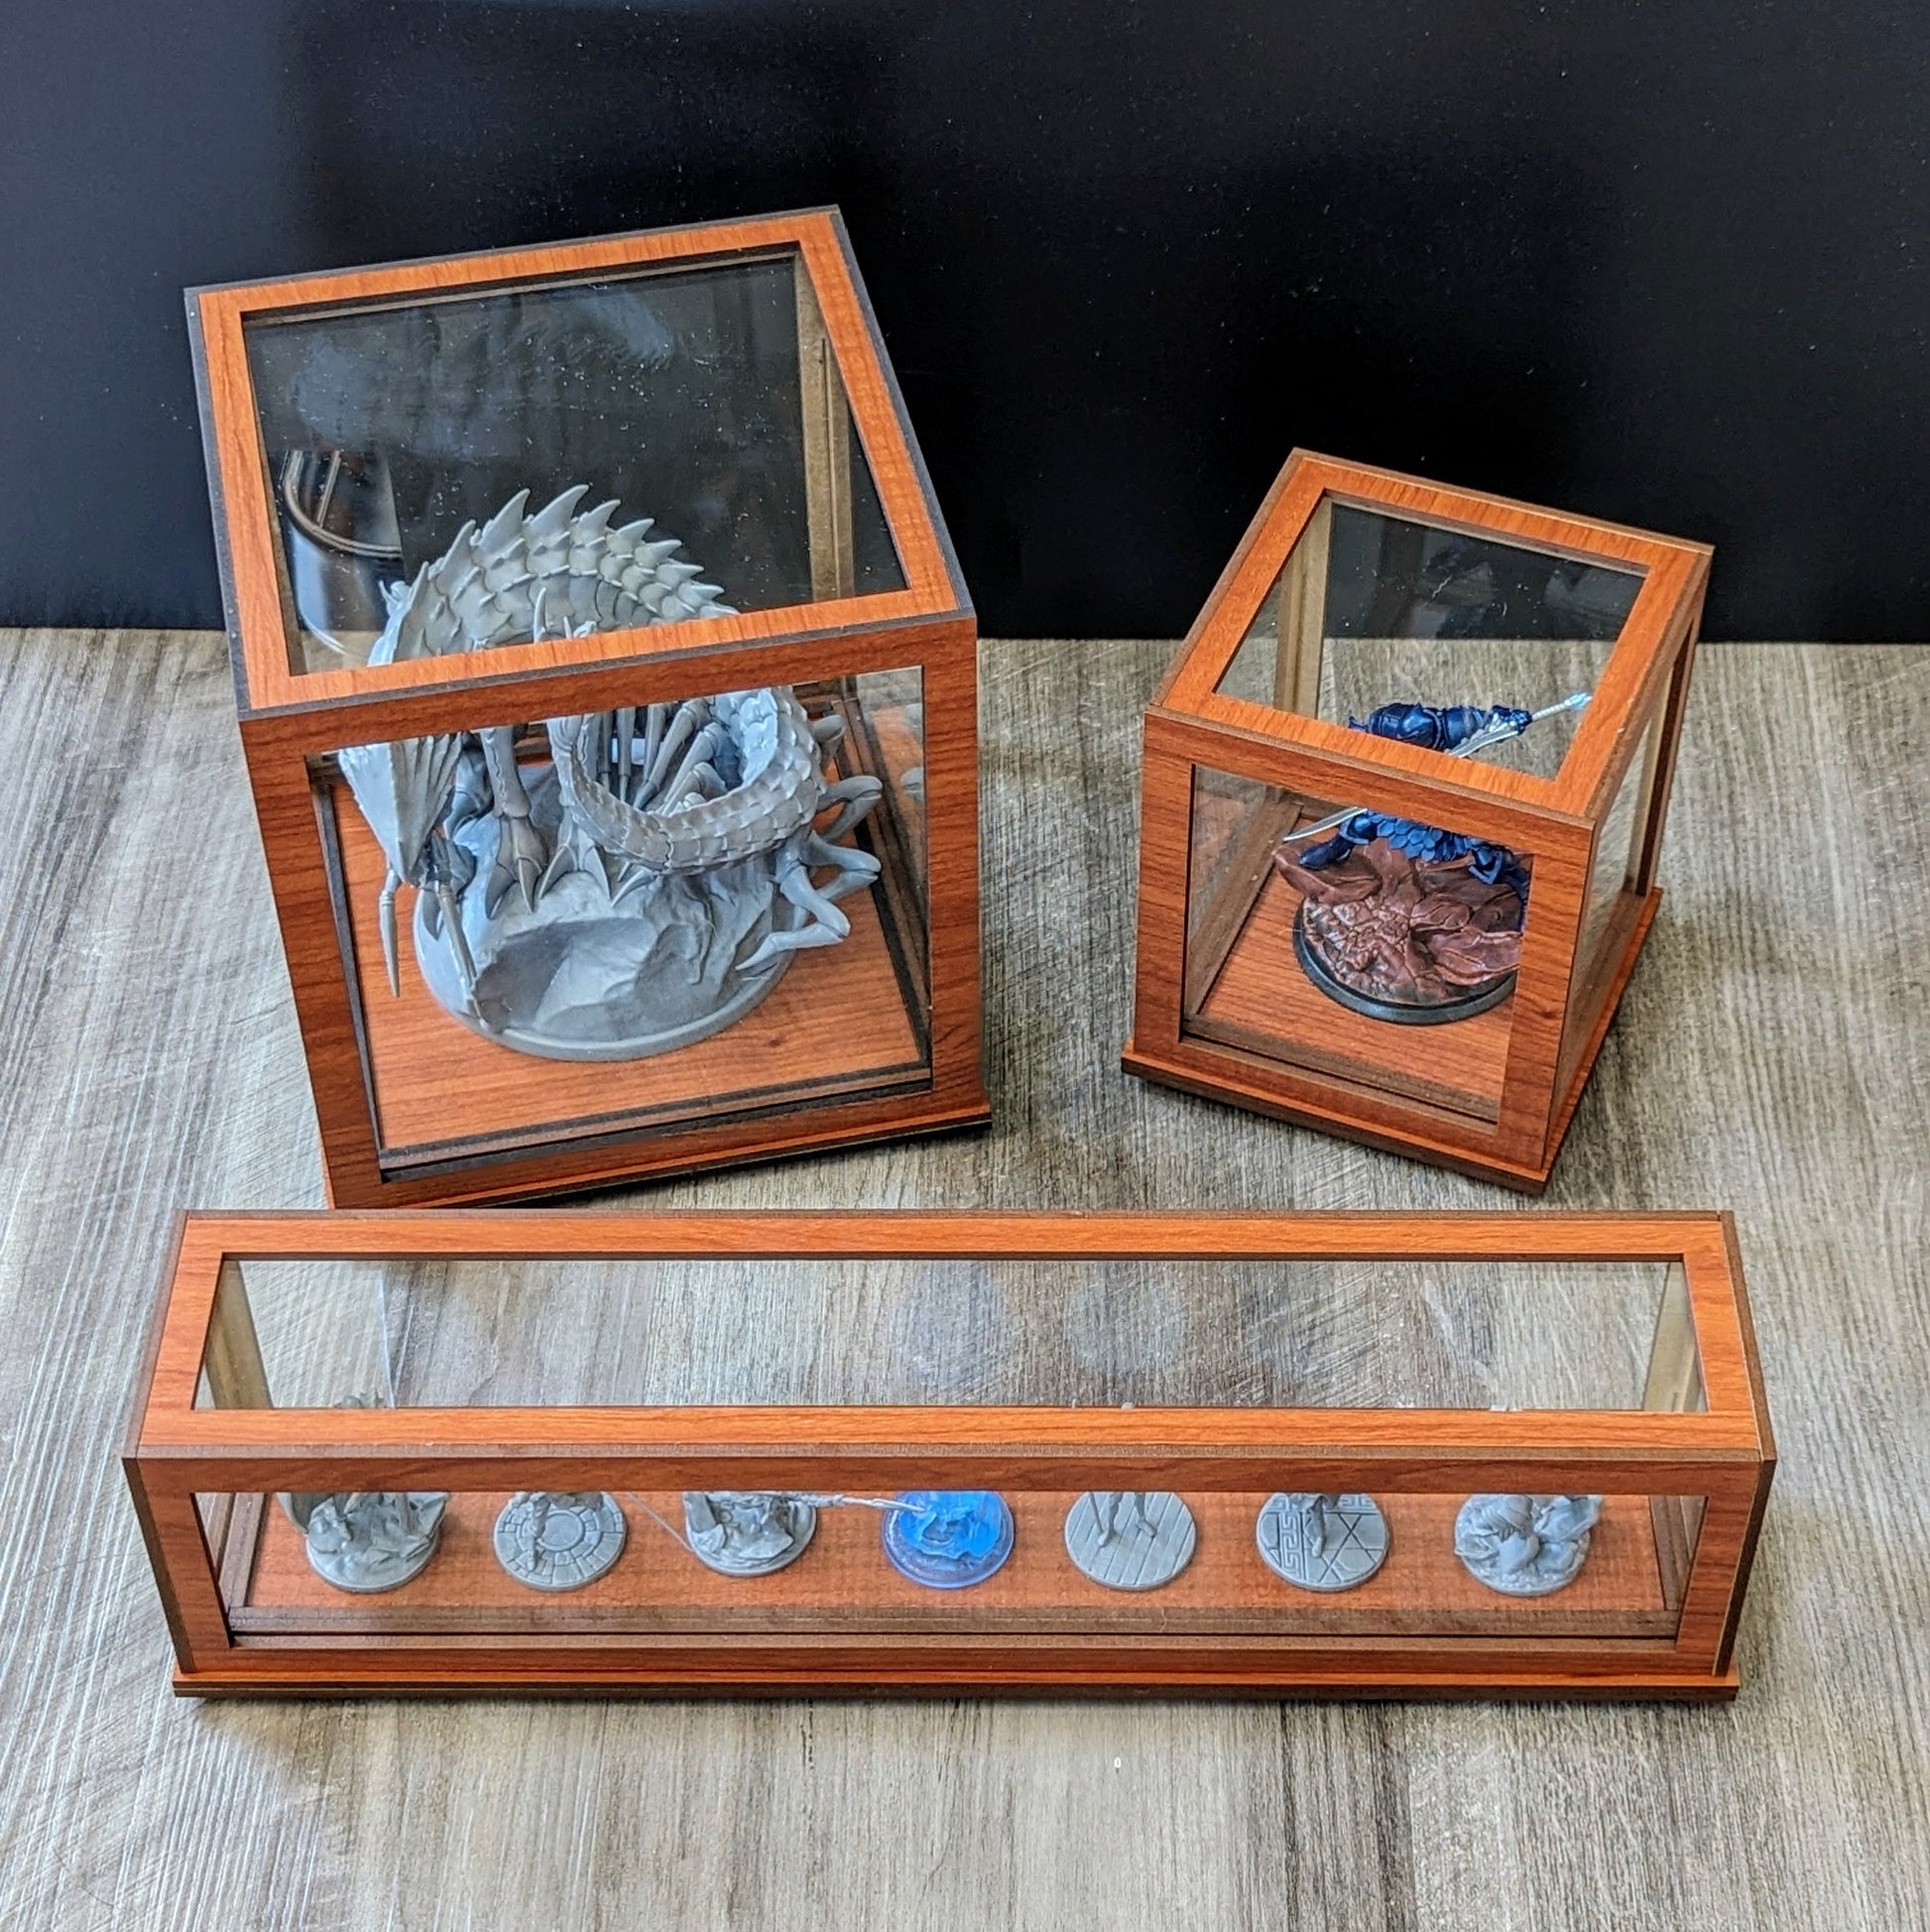 display case for stormlight archive TTRPG miniatures from brotherwise for brandon sanderson cosmere